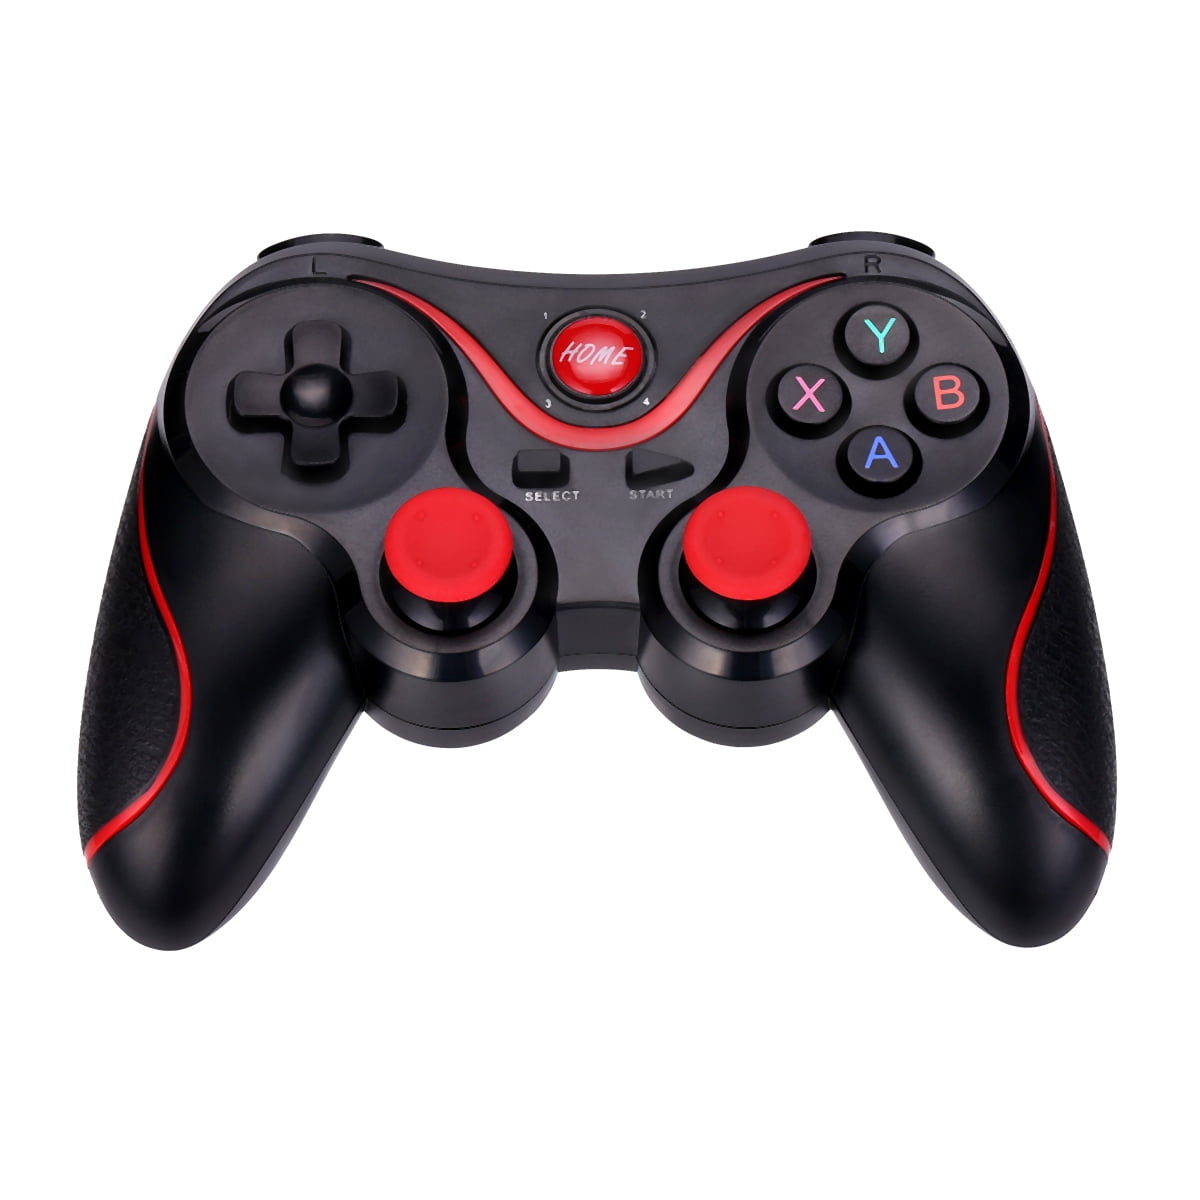 NoyoKere Wireless Bluetooth Gamepad Remote Joystick Controller Compatible with Android/IOS/PC black